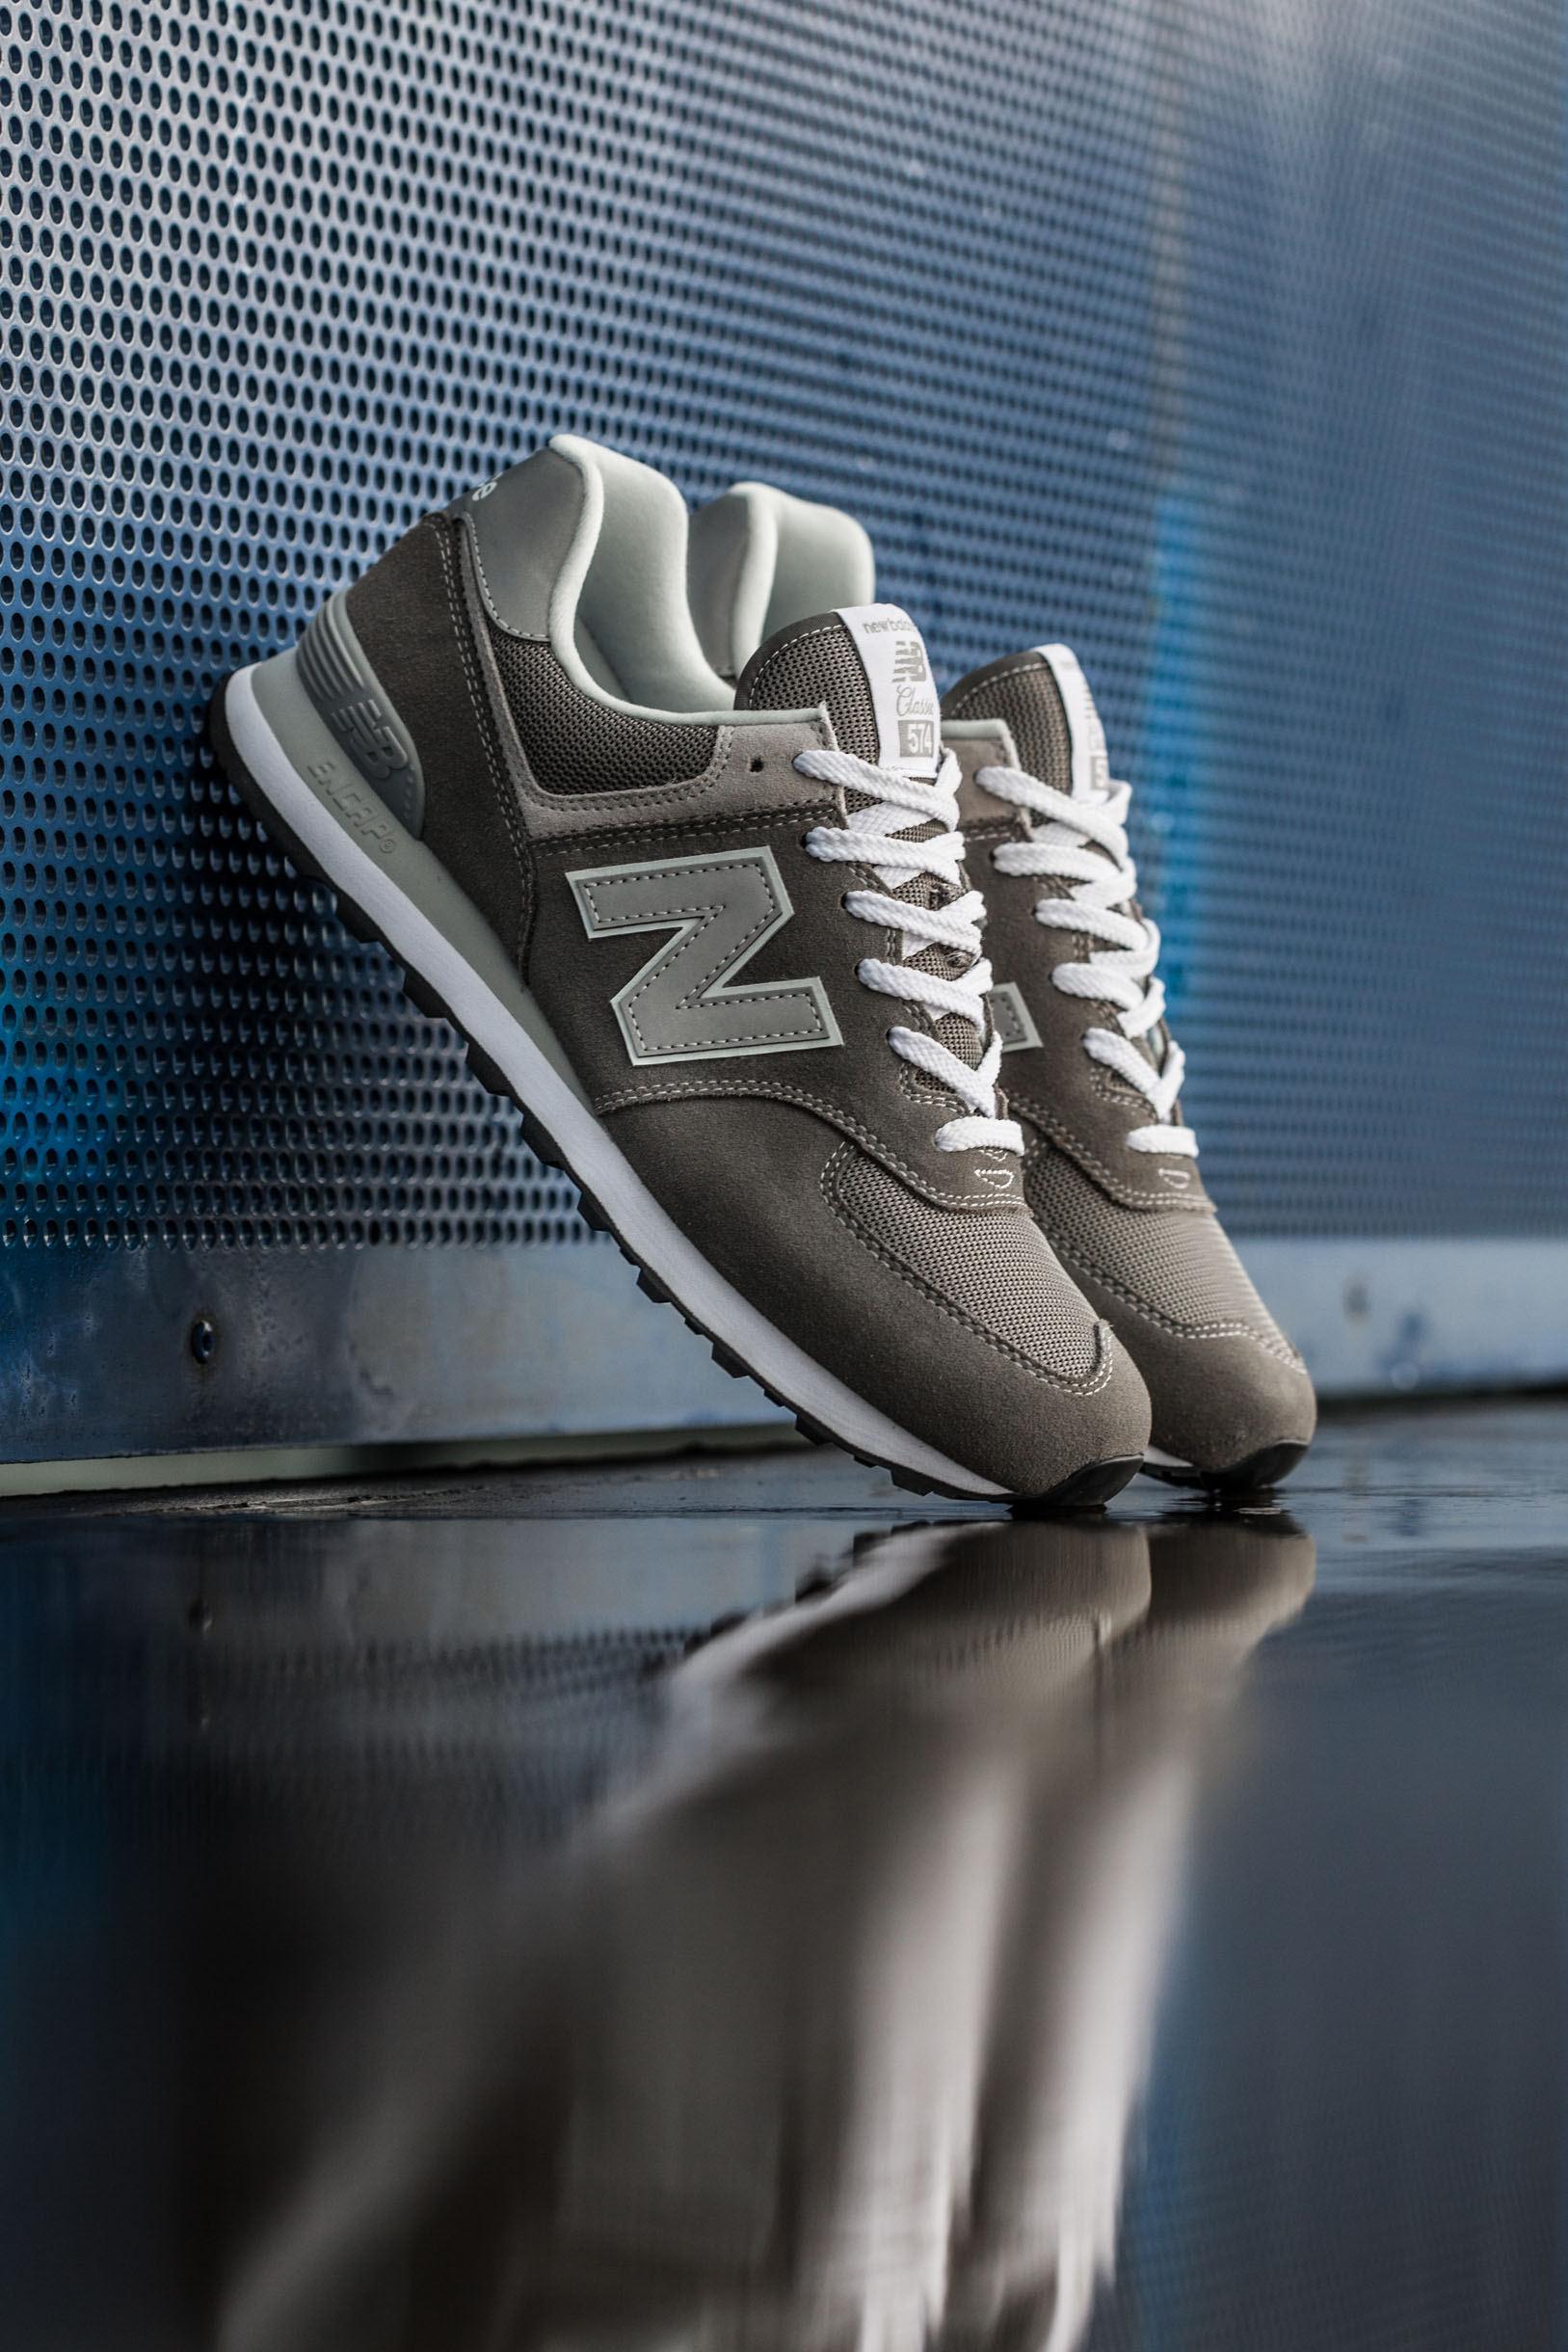 Behind the shoe: New Balance 574